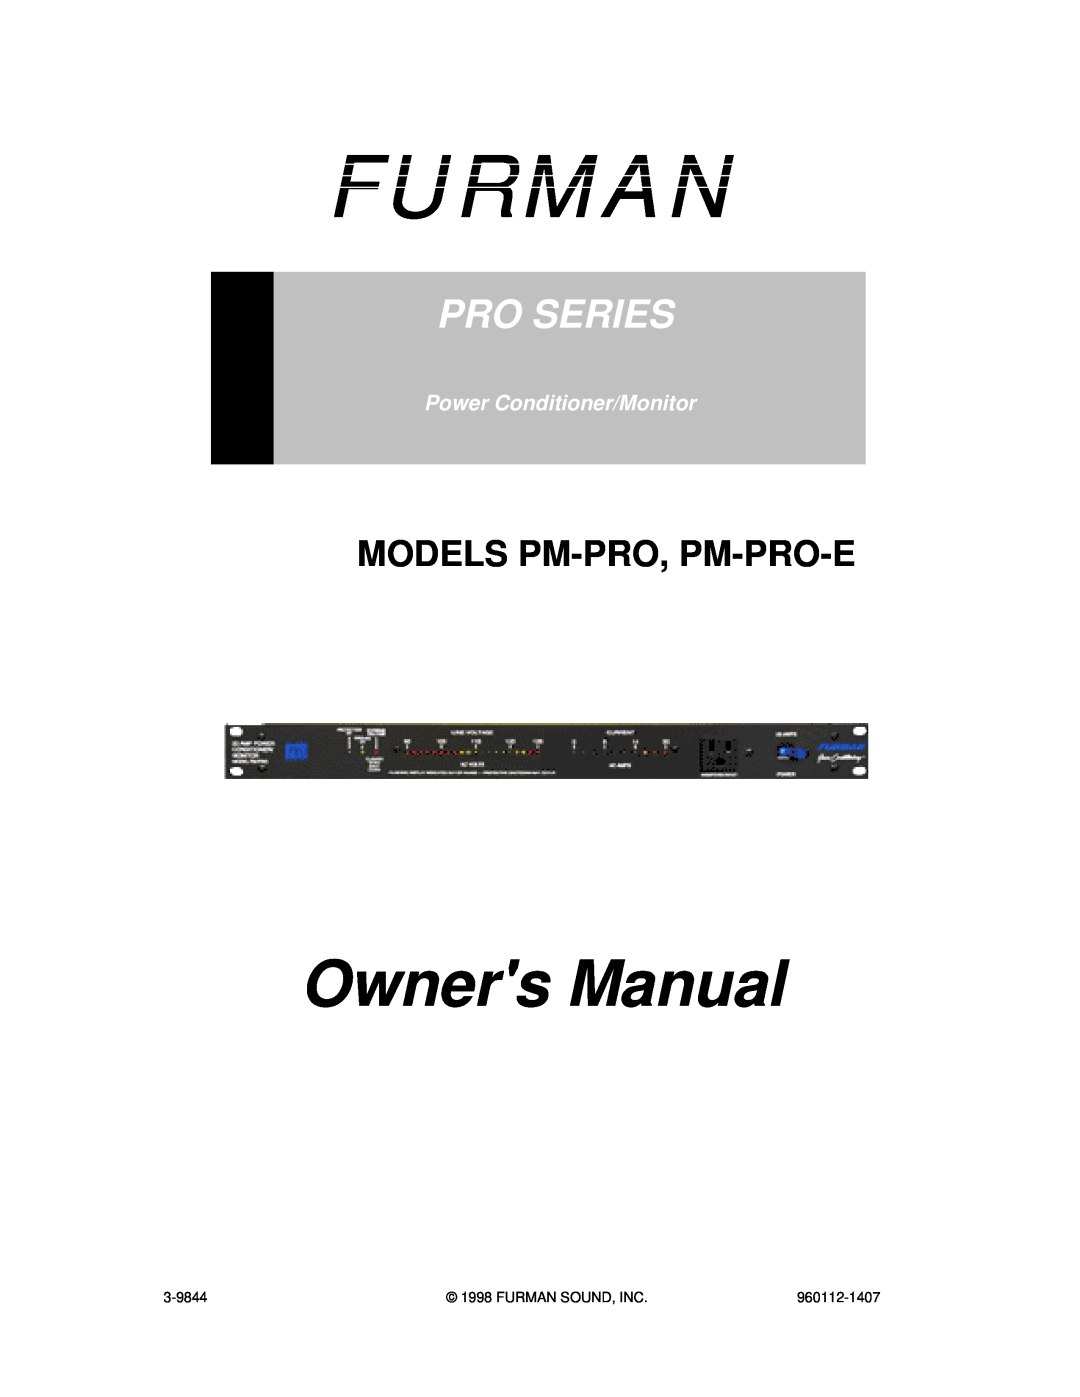 Furman Sound PM-PRO owner manual Owners Manual, Furman, Pro Series, Models Pm-Pro, Pm-Pro-E, Power Conditioner/Monitor 